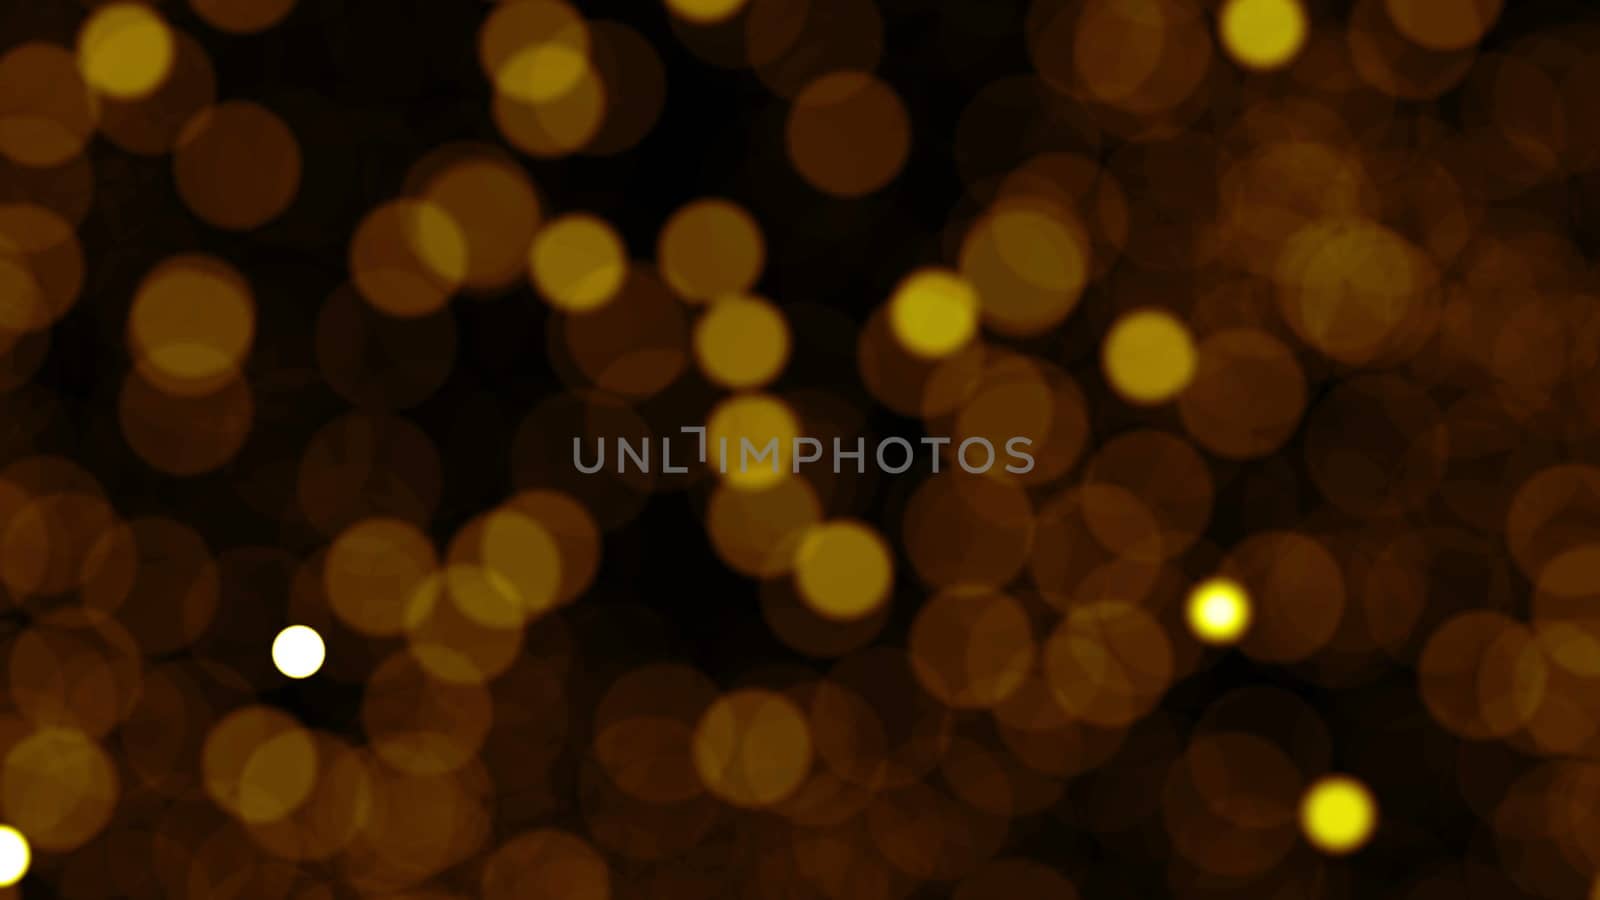 Abstract background with blurred particles. 3D rendered